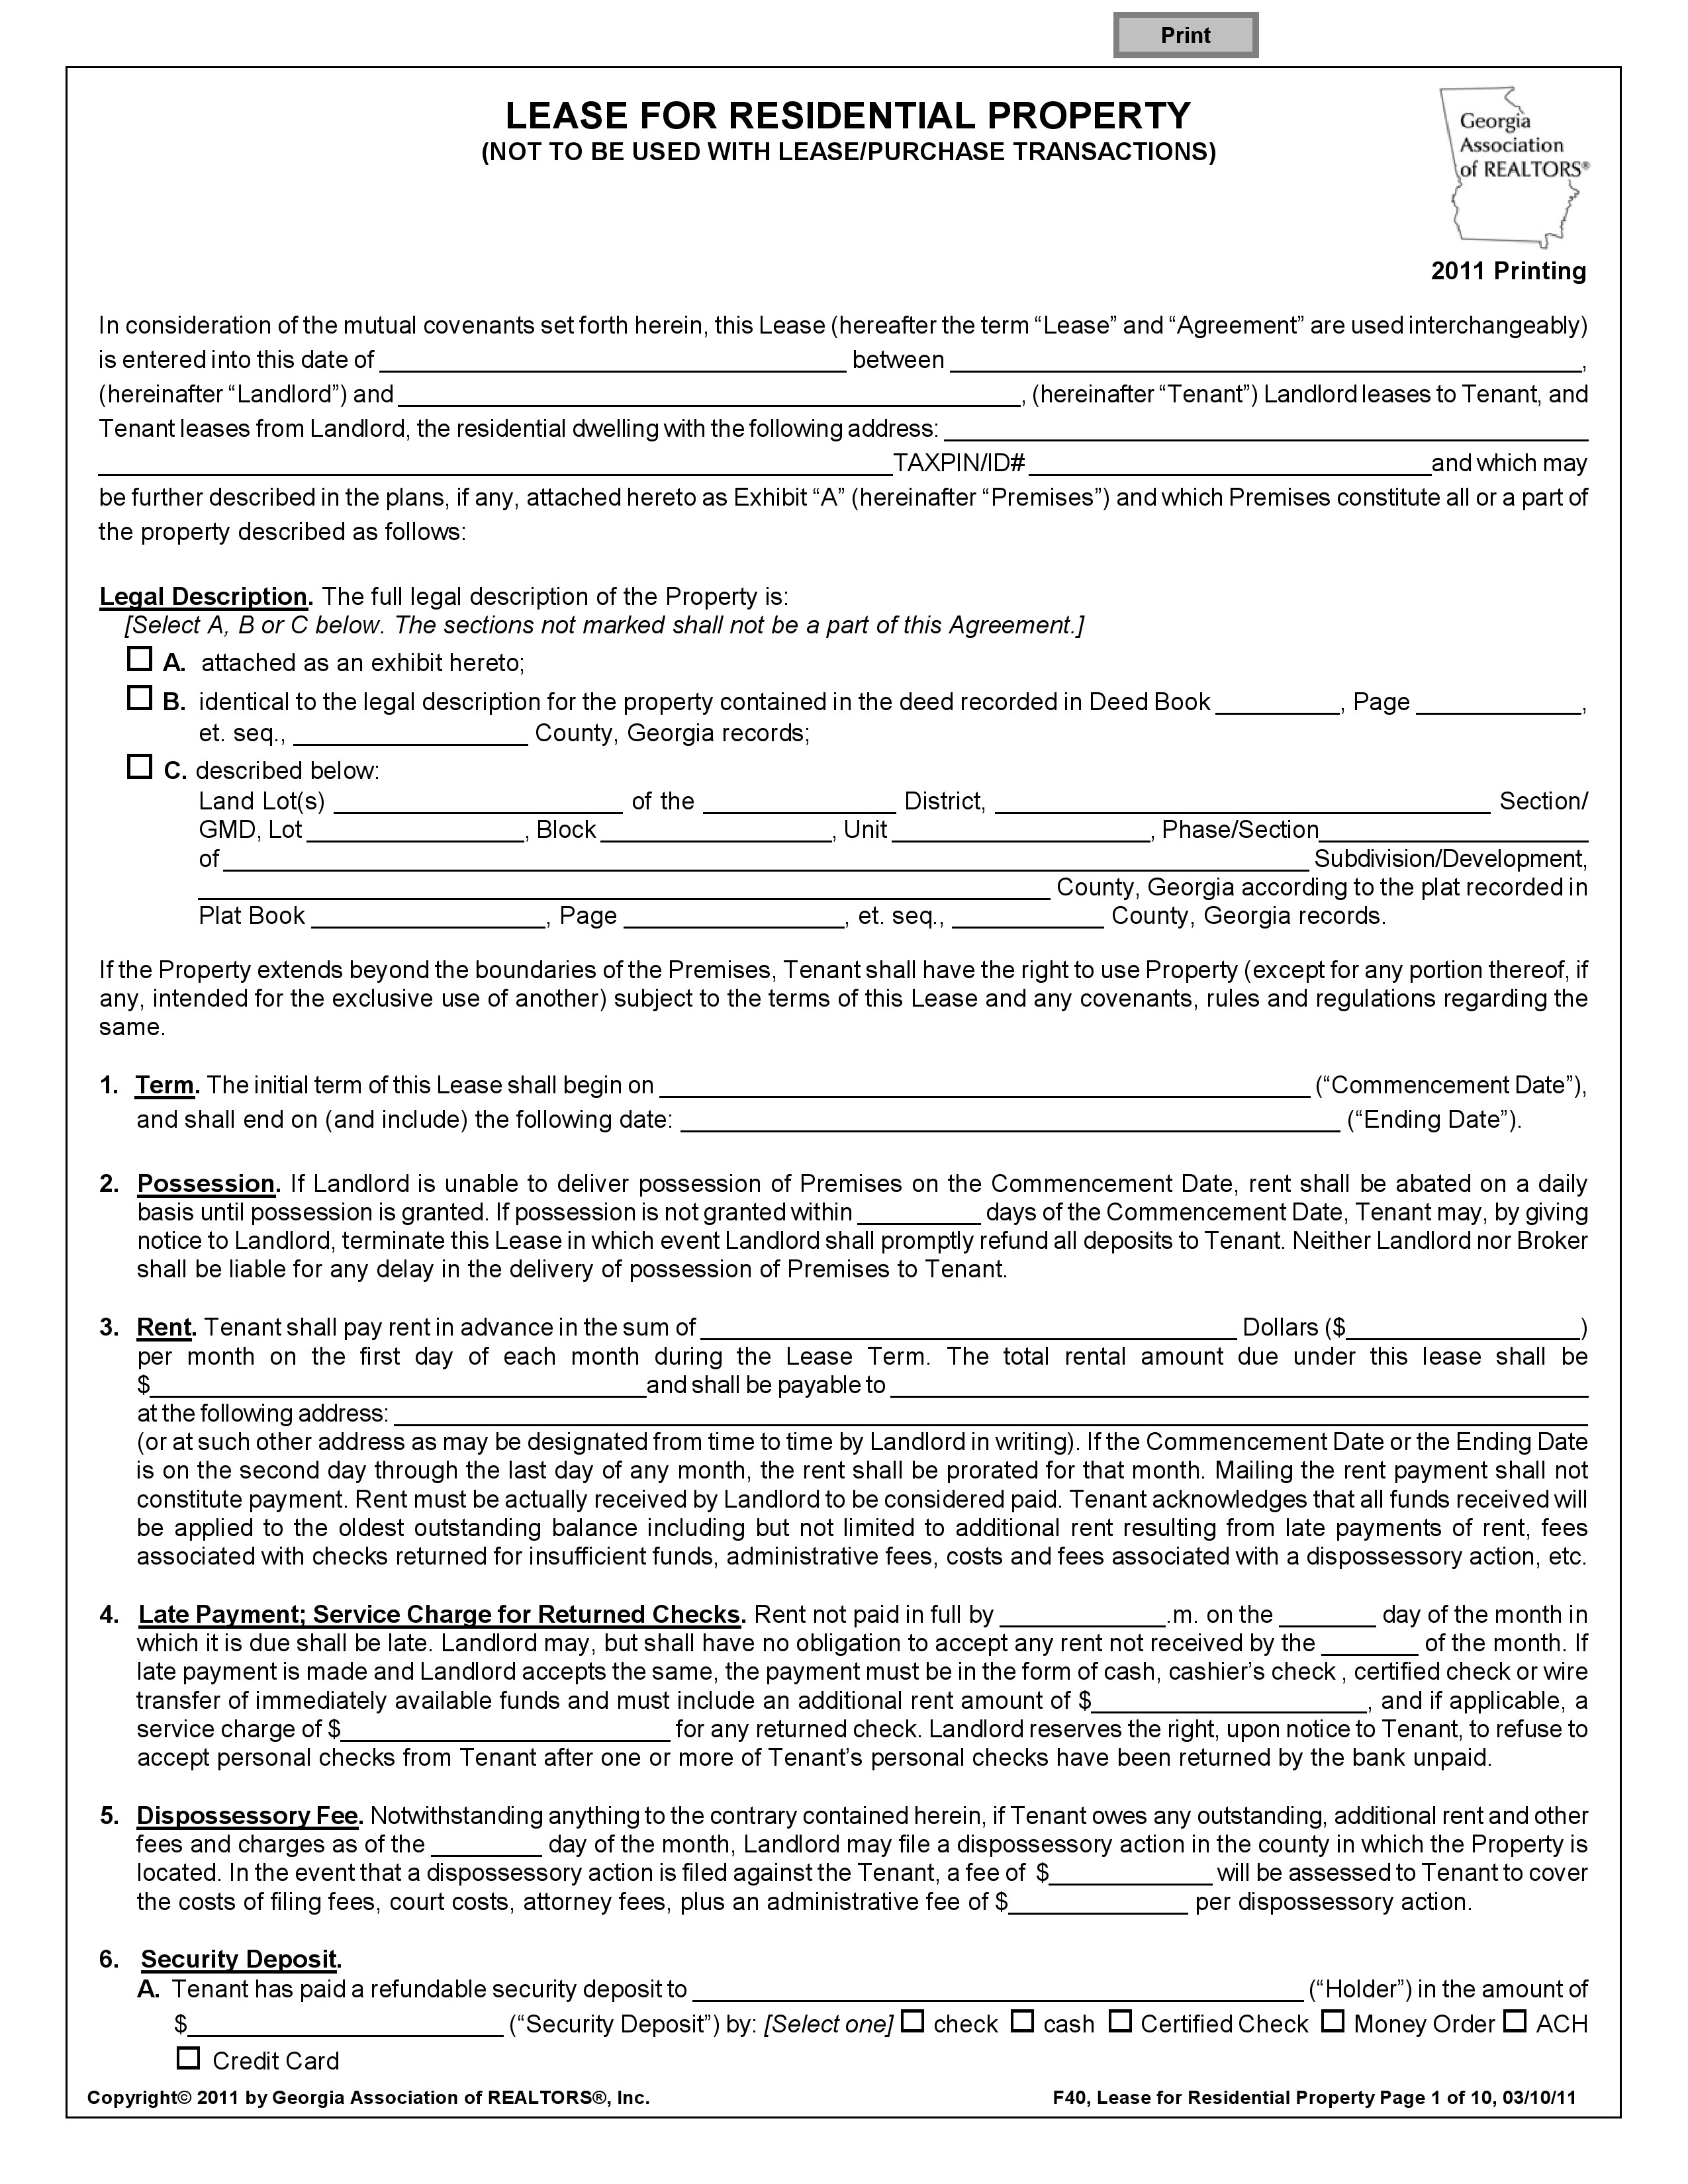 Free Printable Lease Agreement Template Residential Lease Agreement Template Free Download Blank Rental